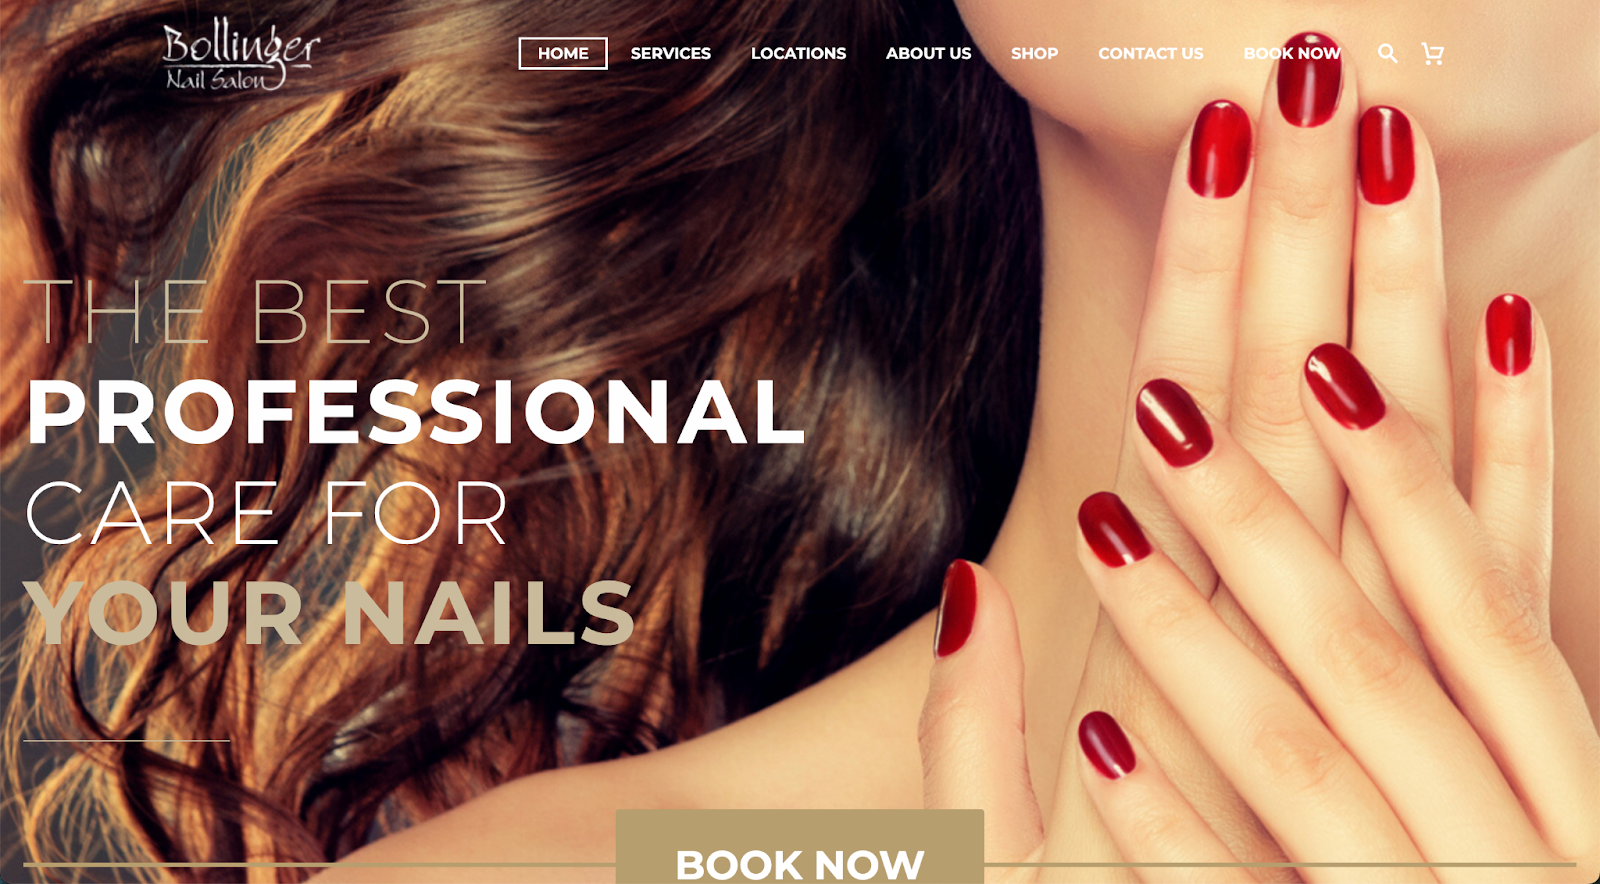 Best nail salon websites, example from Bollinger Nail Salon.